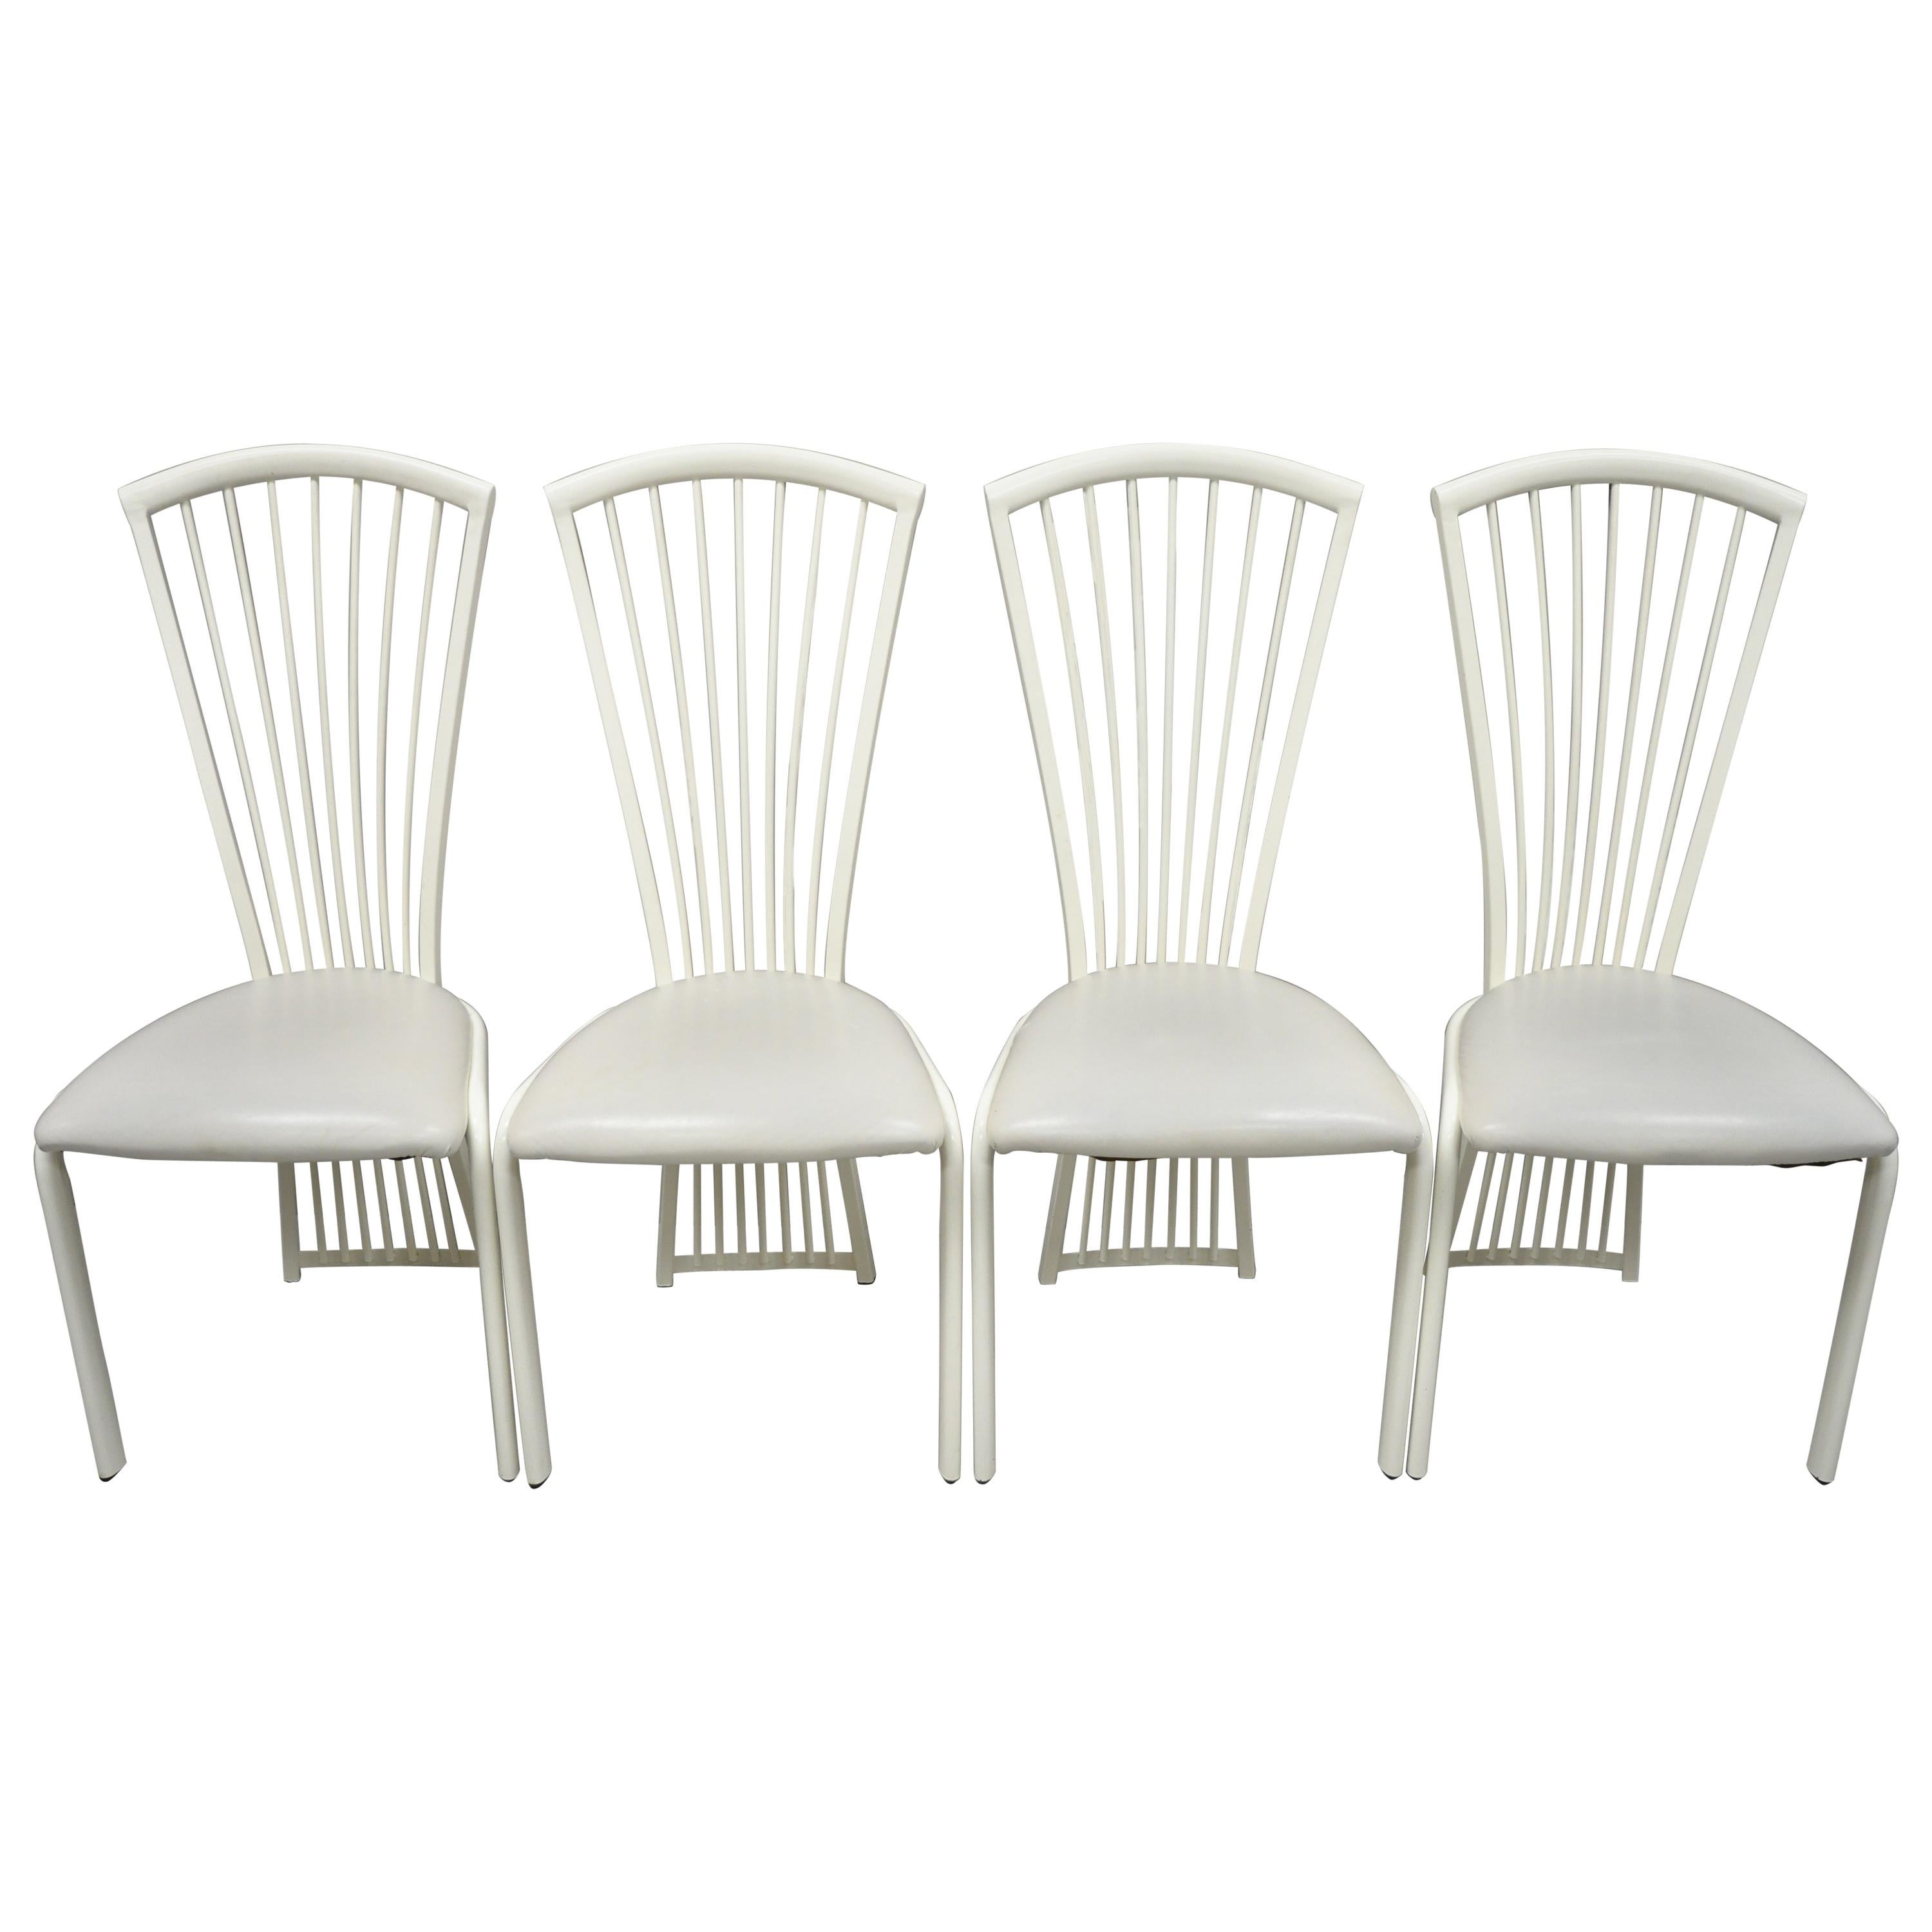 Set of Four Postmodern Art Deco Style Metal Fan Back Dining Chairs by Liberty